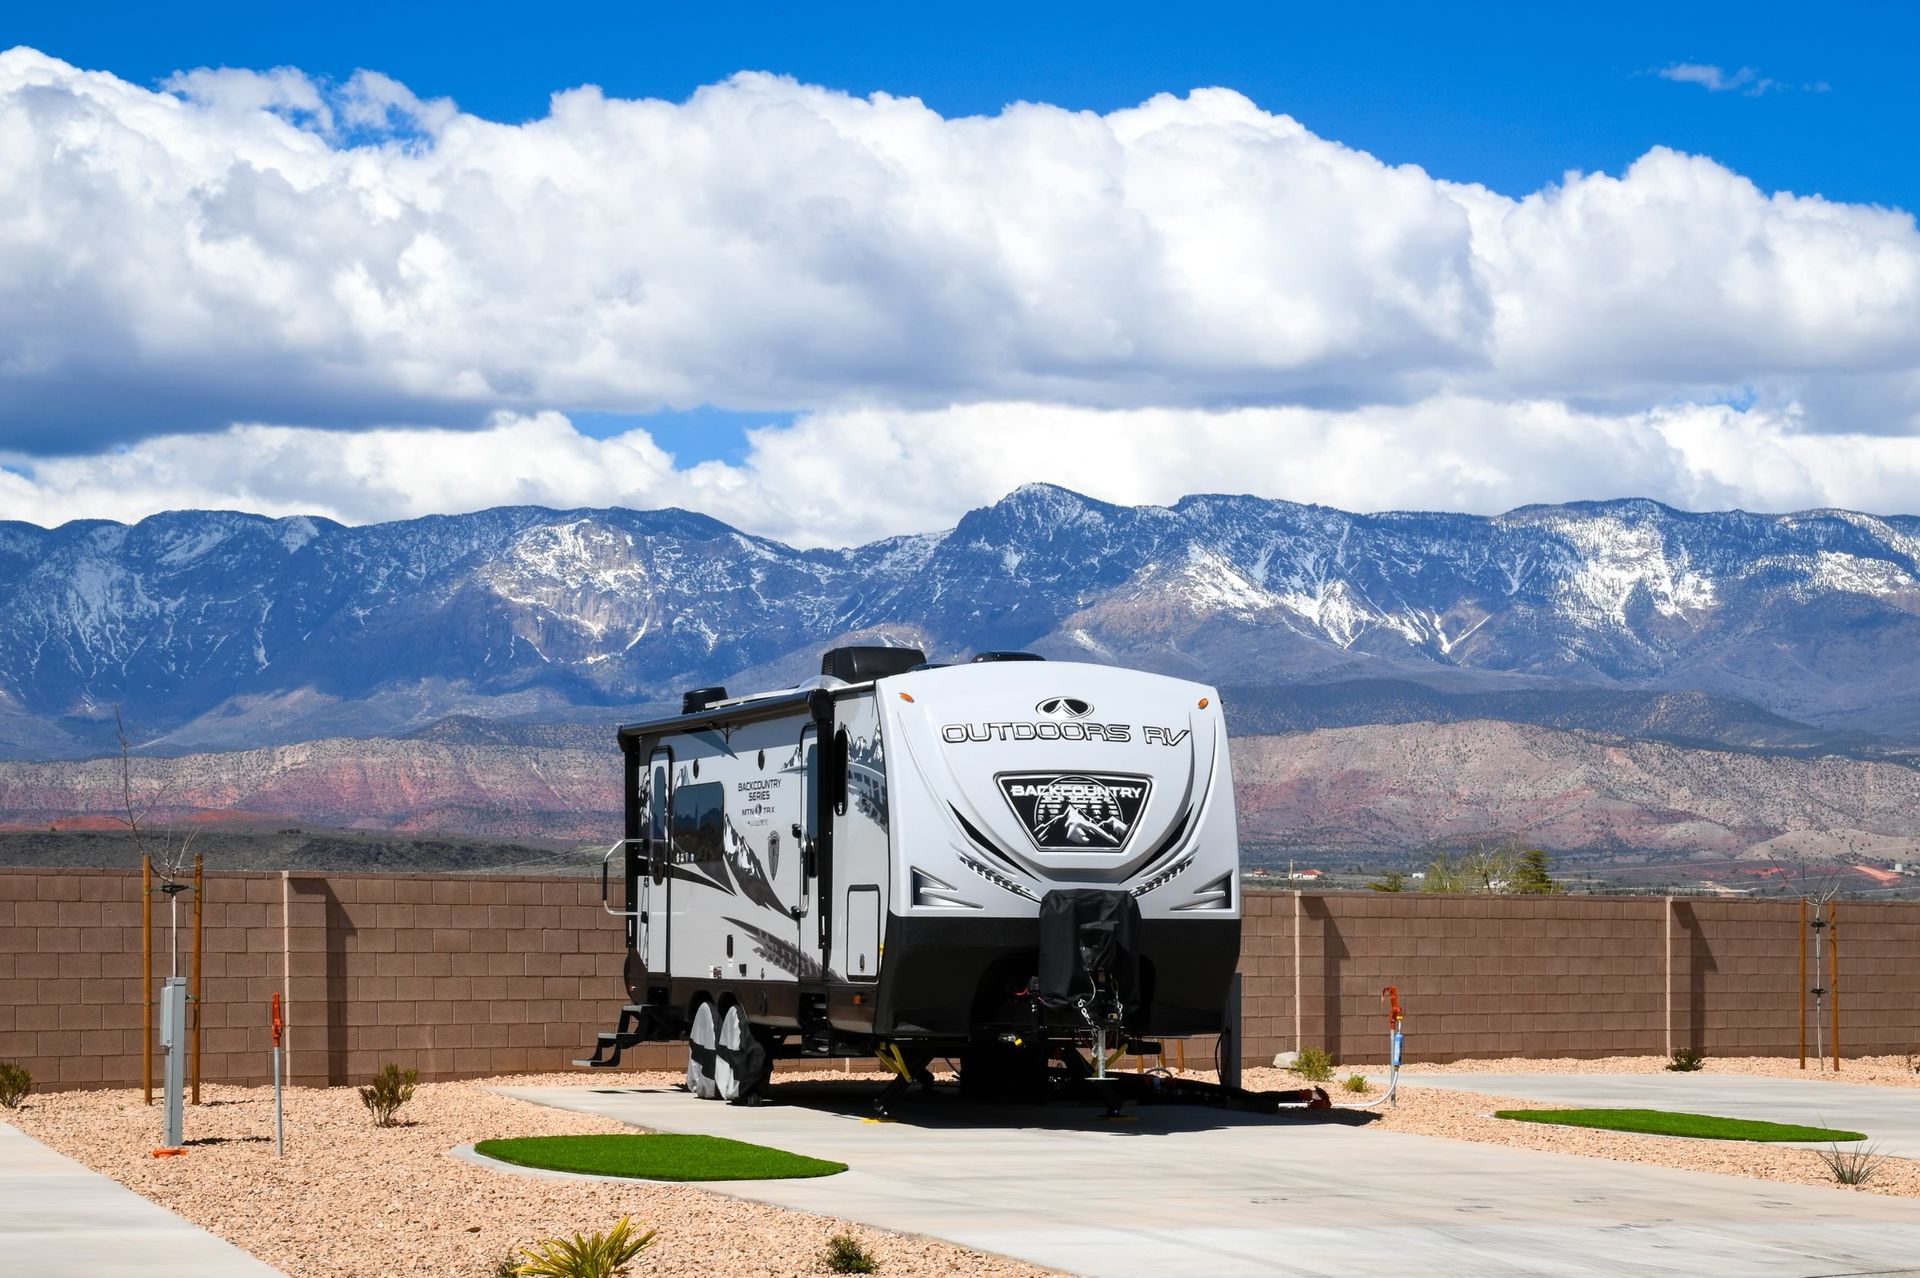 A rv is parked in a parking lot with mountains in the background.